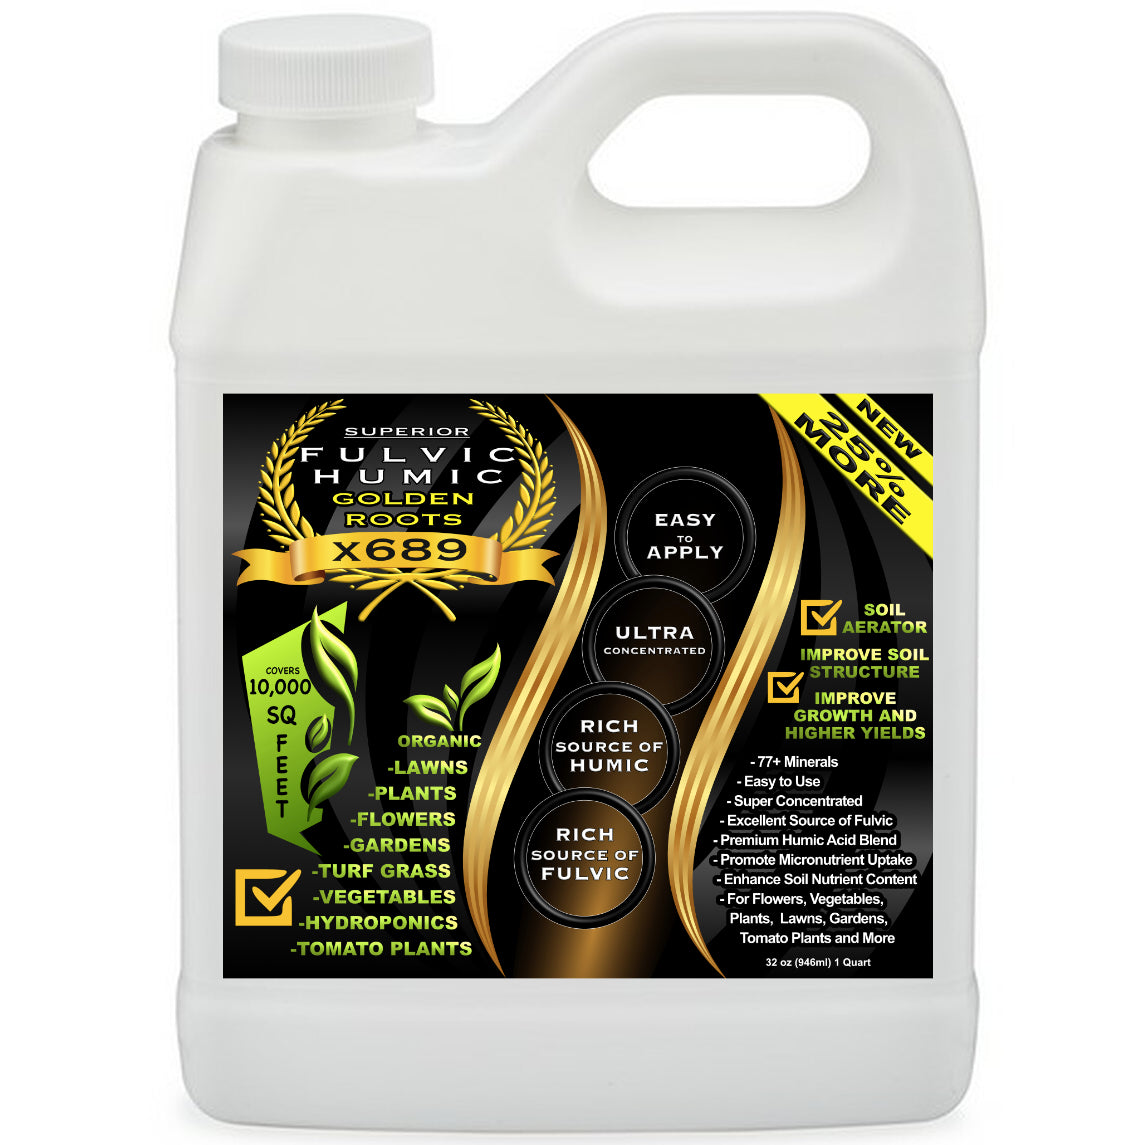 Superior Fulvic Humic Golden Roots